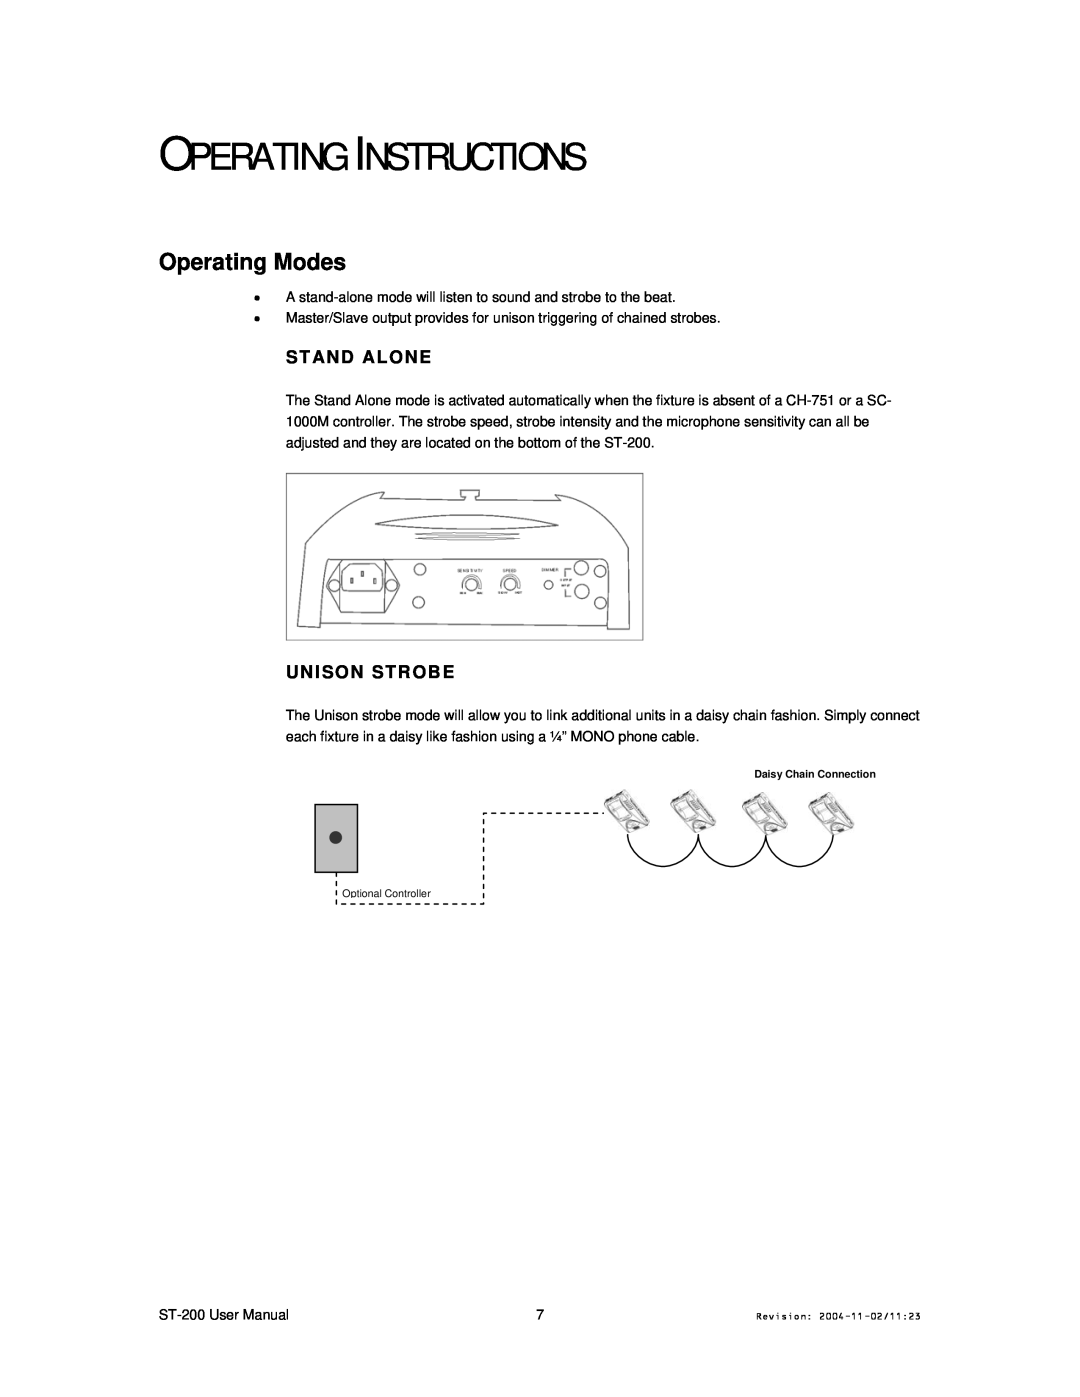 Chauvet Model ST-200 user manual Operating Instructions, Operating Modes, Stand Alone, Unison Strobe 